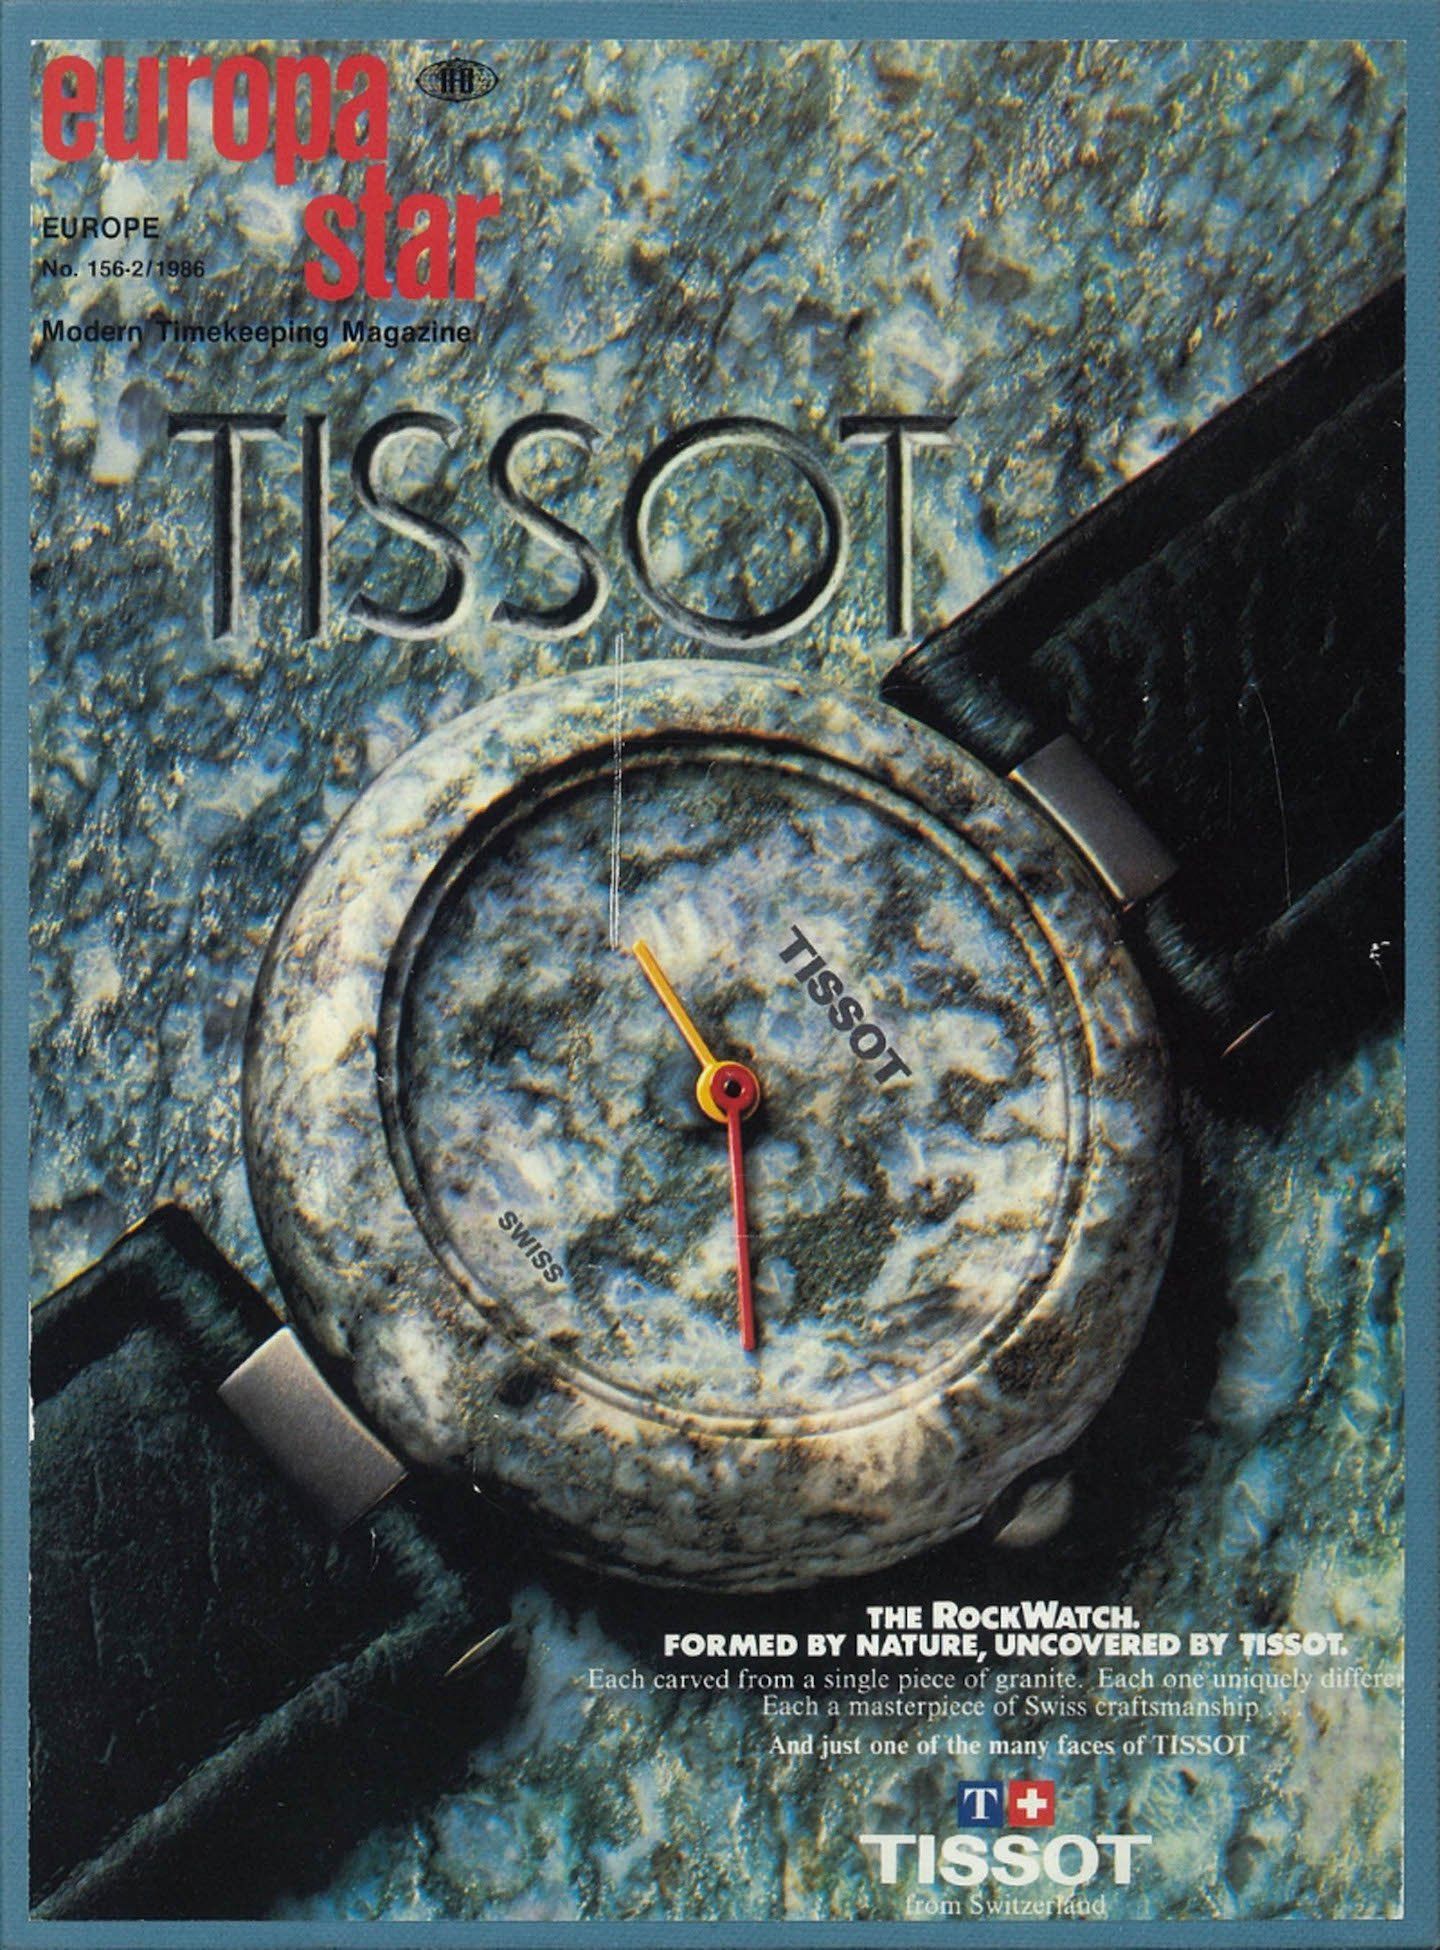 Tissot RockWatch ad from the 1980s